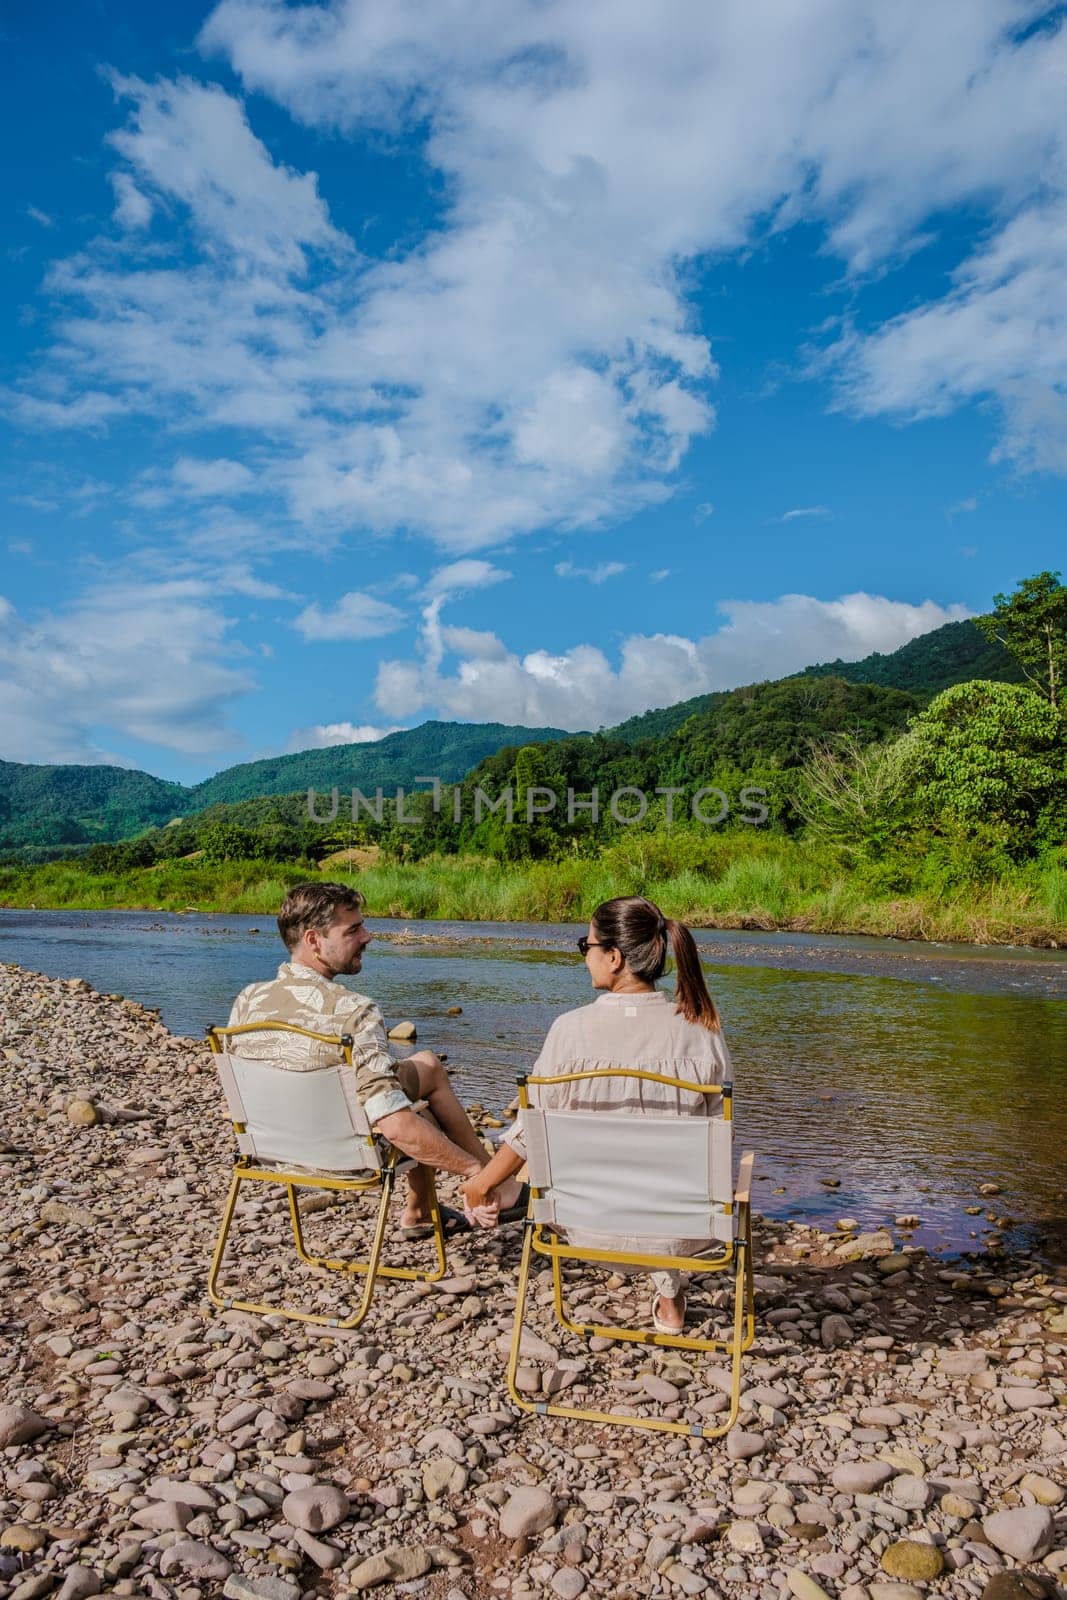 a couple of men and woman camping at the river in Nan Sapan Thailand, men and woman relaxing in the mountains of Northern Thailand looking out over the river